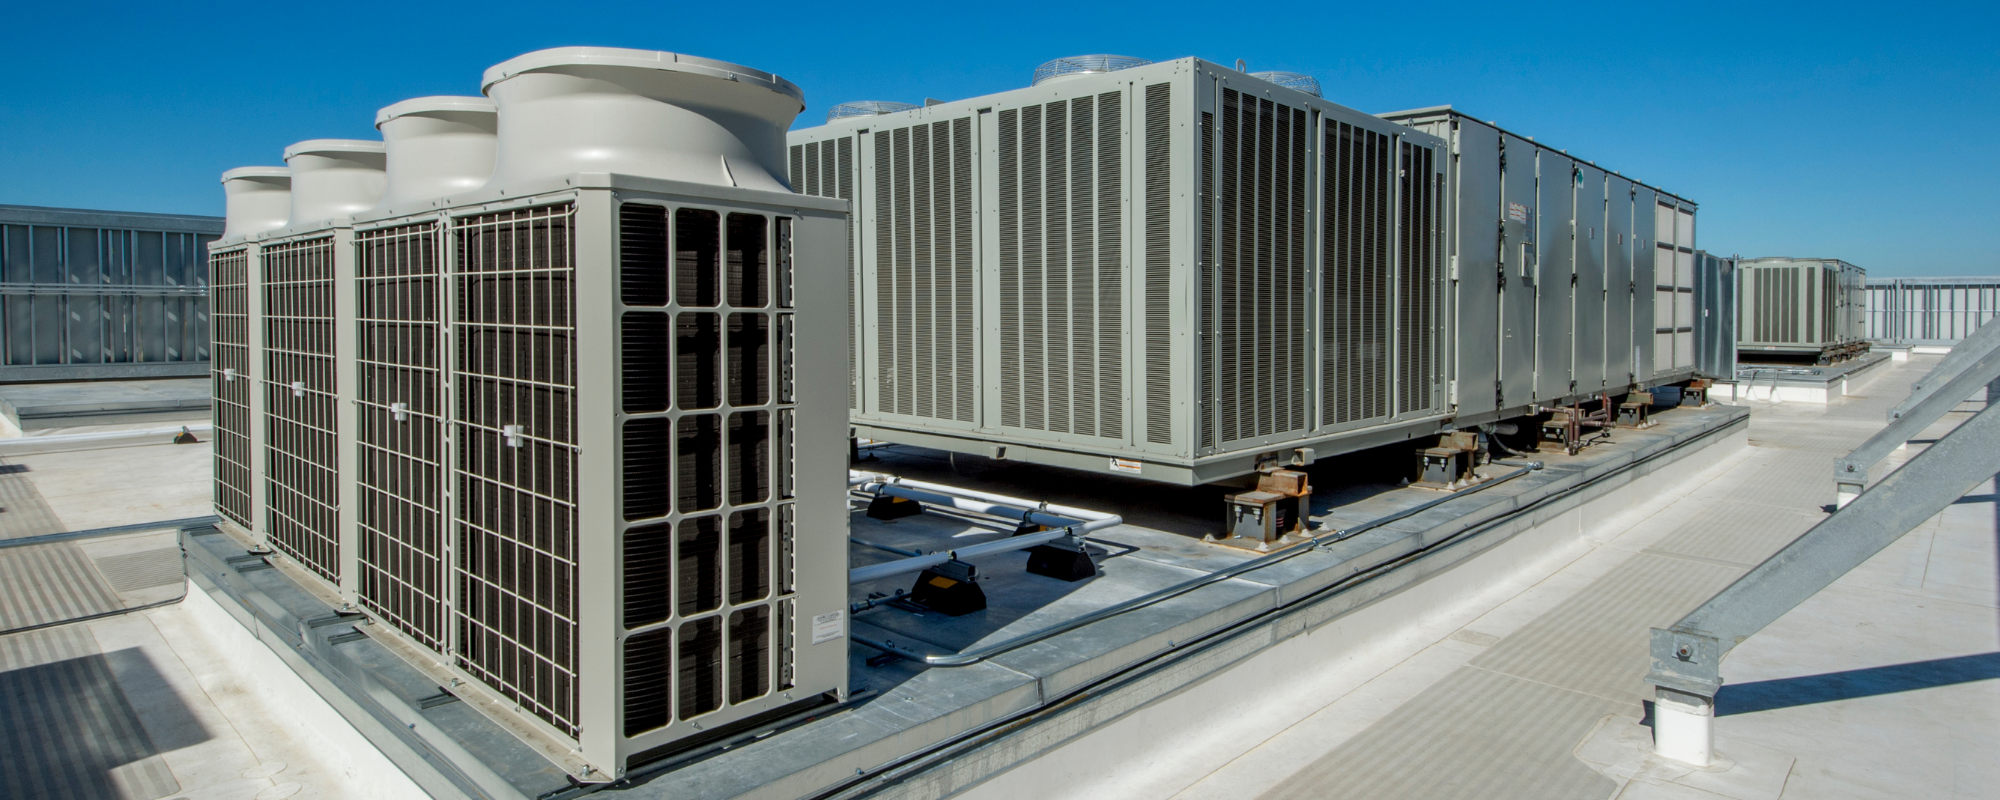 Rooftop commercial HVAC system 